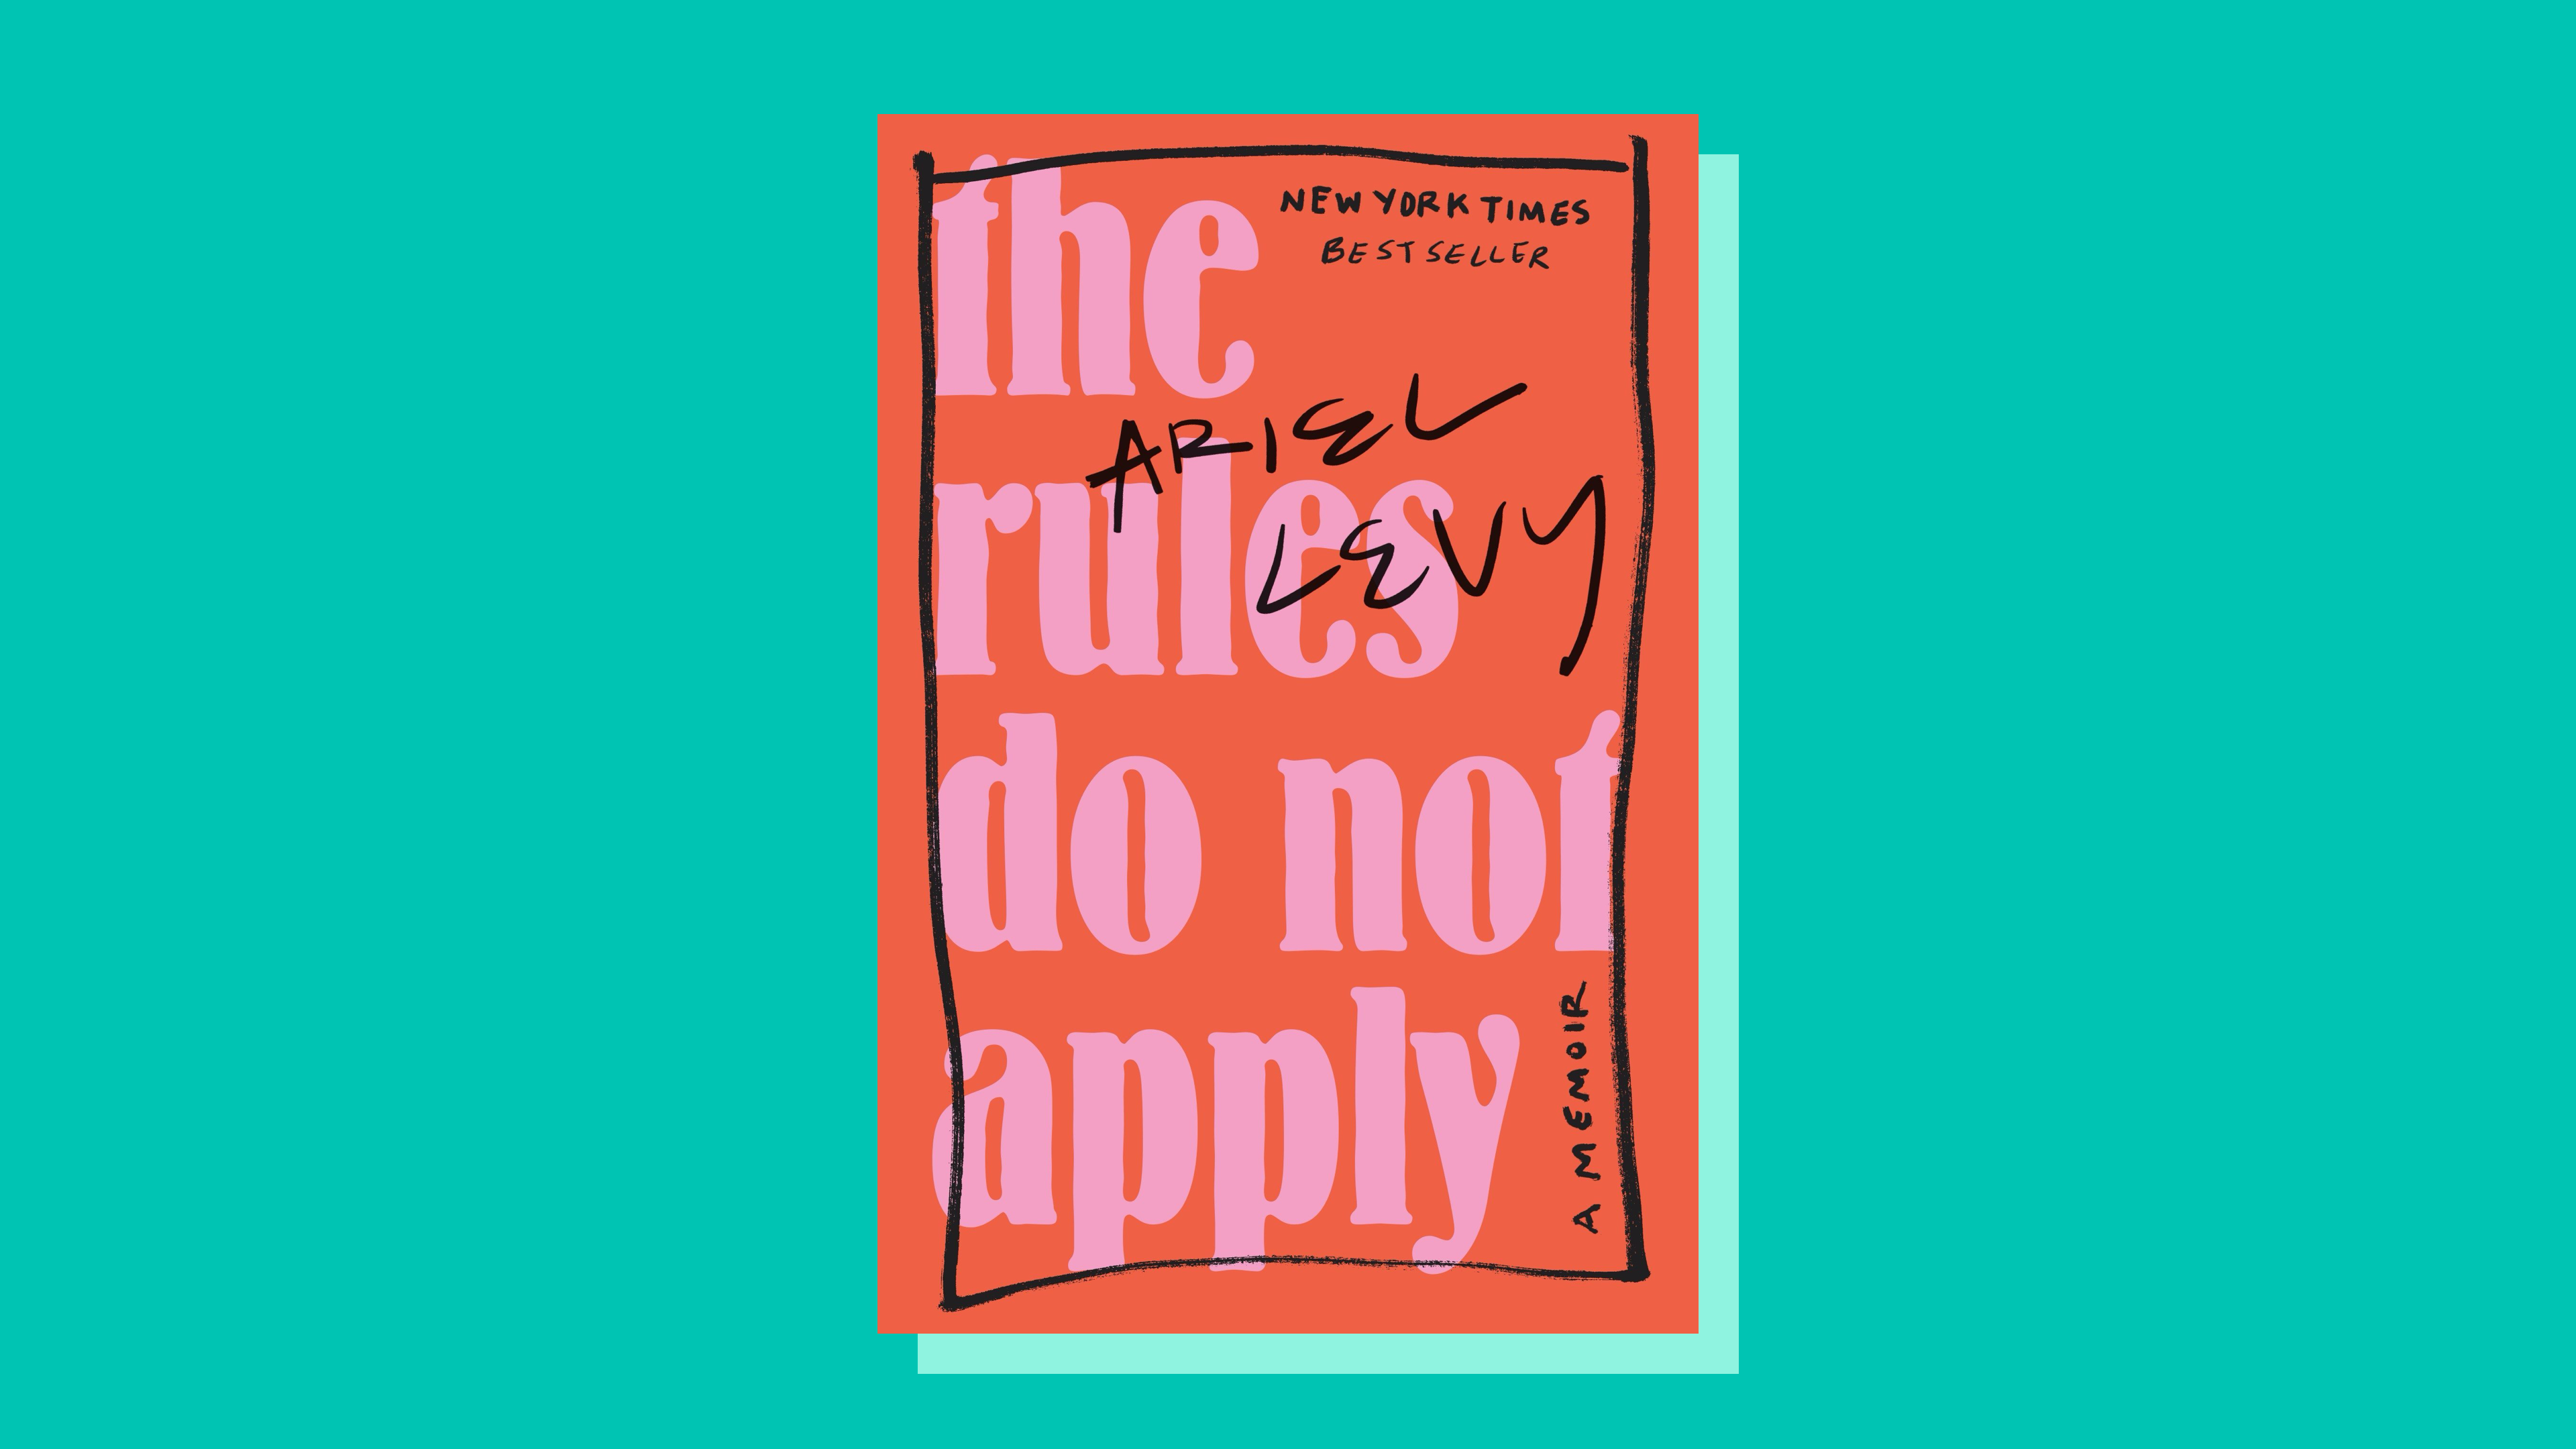 “The Rules Do Not Apply” by Ariel Levy